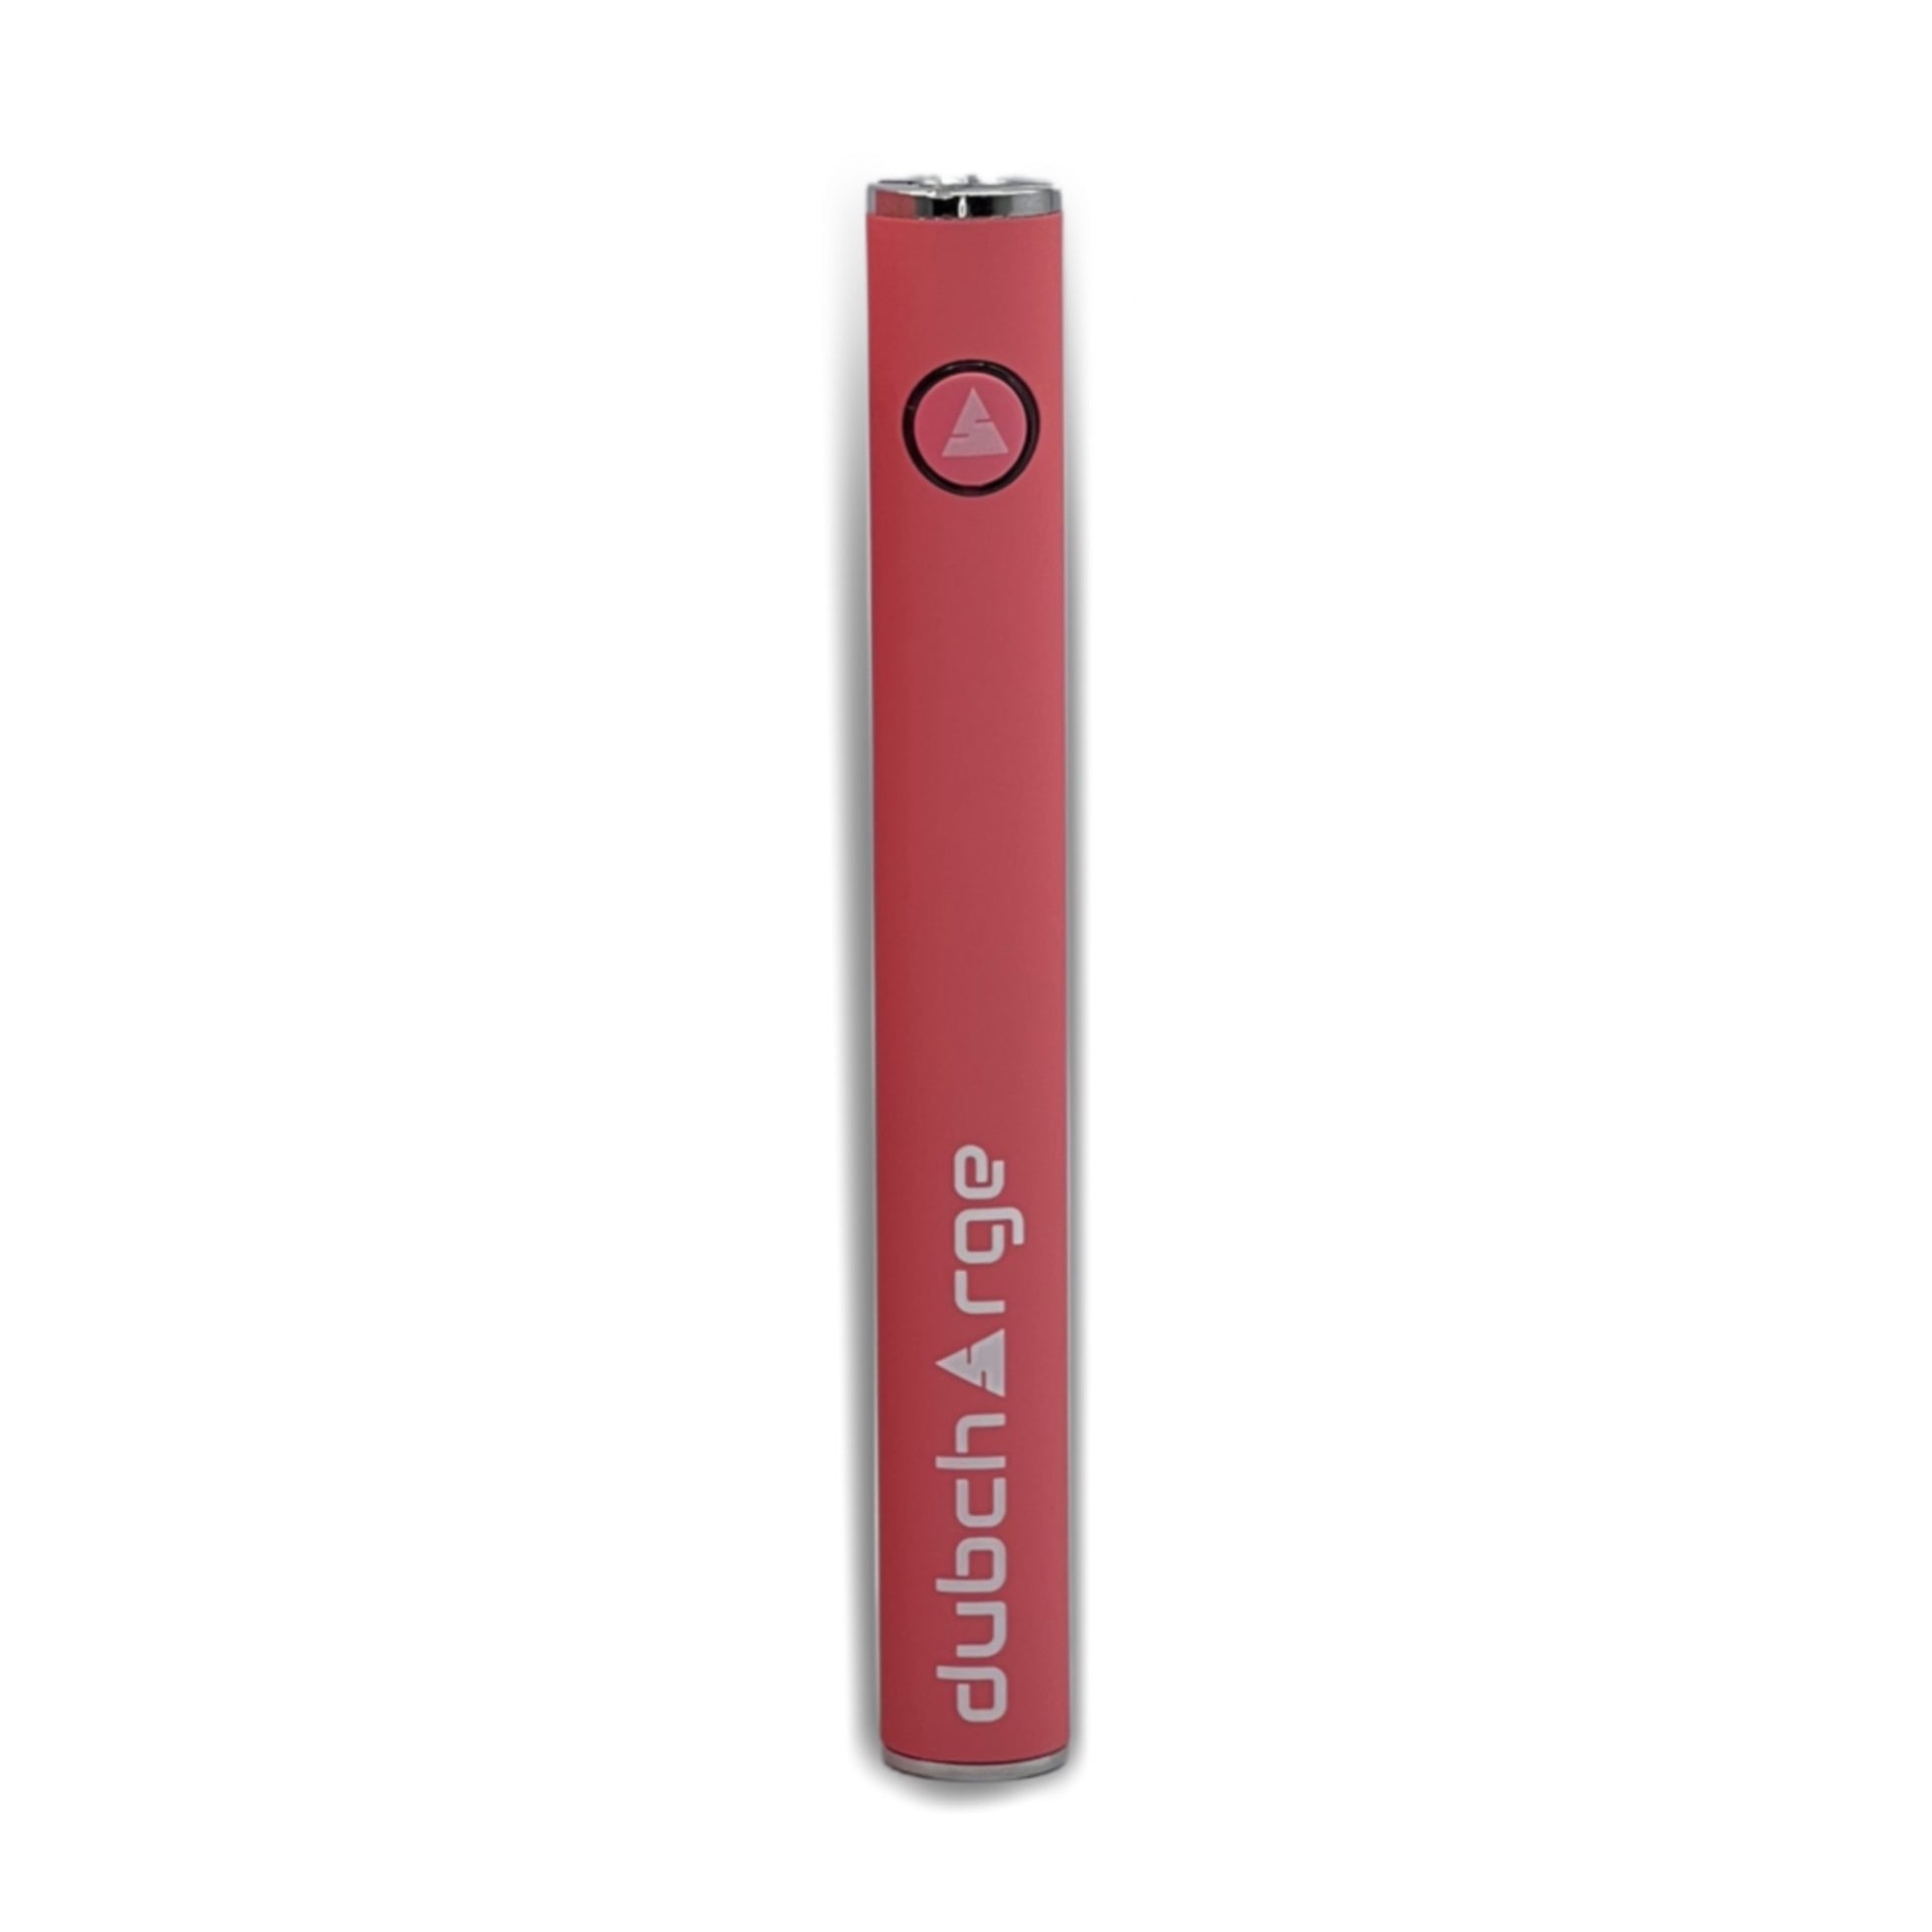 Pink 510 Thread Vaporizer Battery - 1100mAh | High-Capacity Battery for Cartridges and Devices